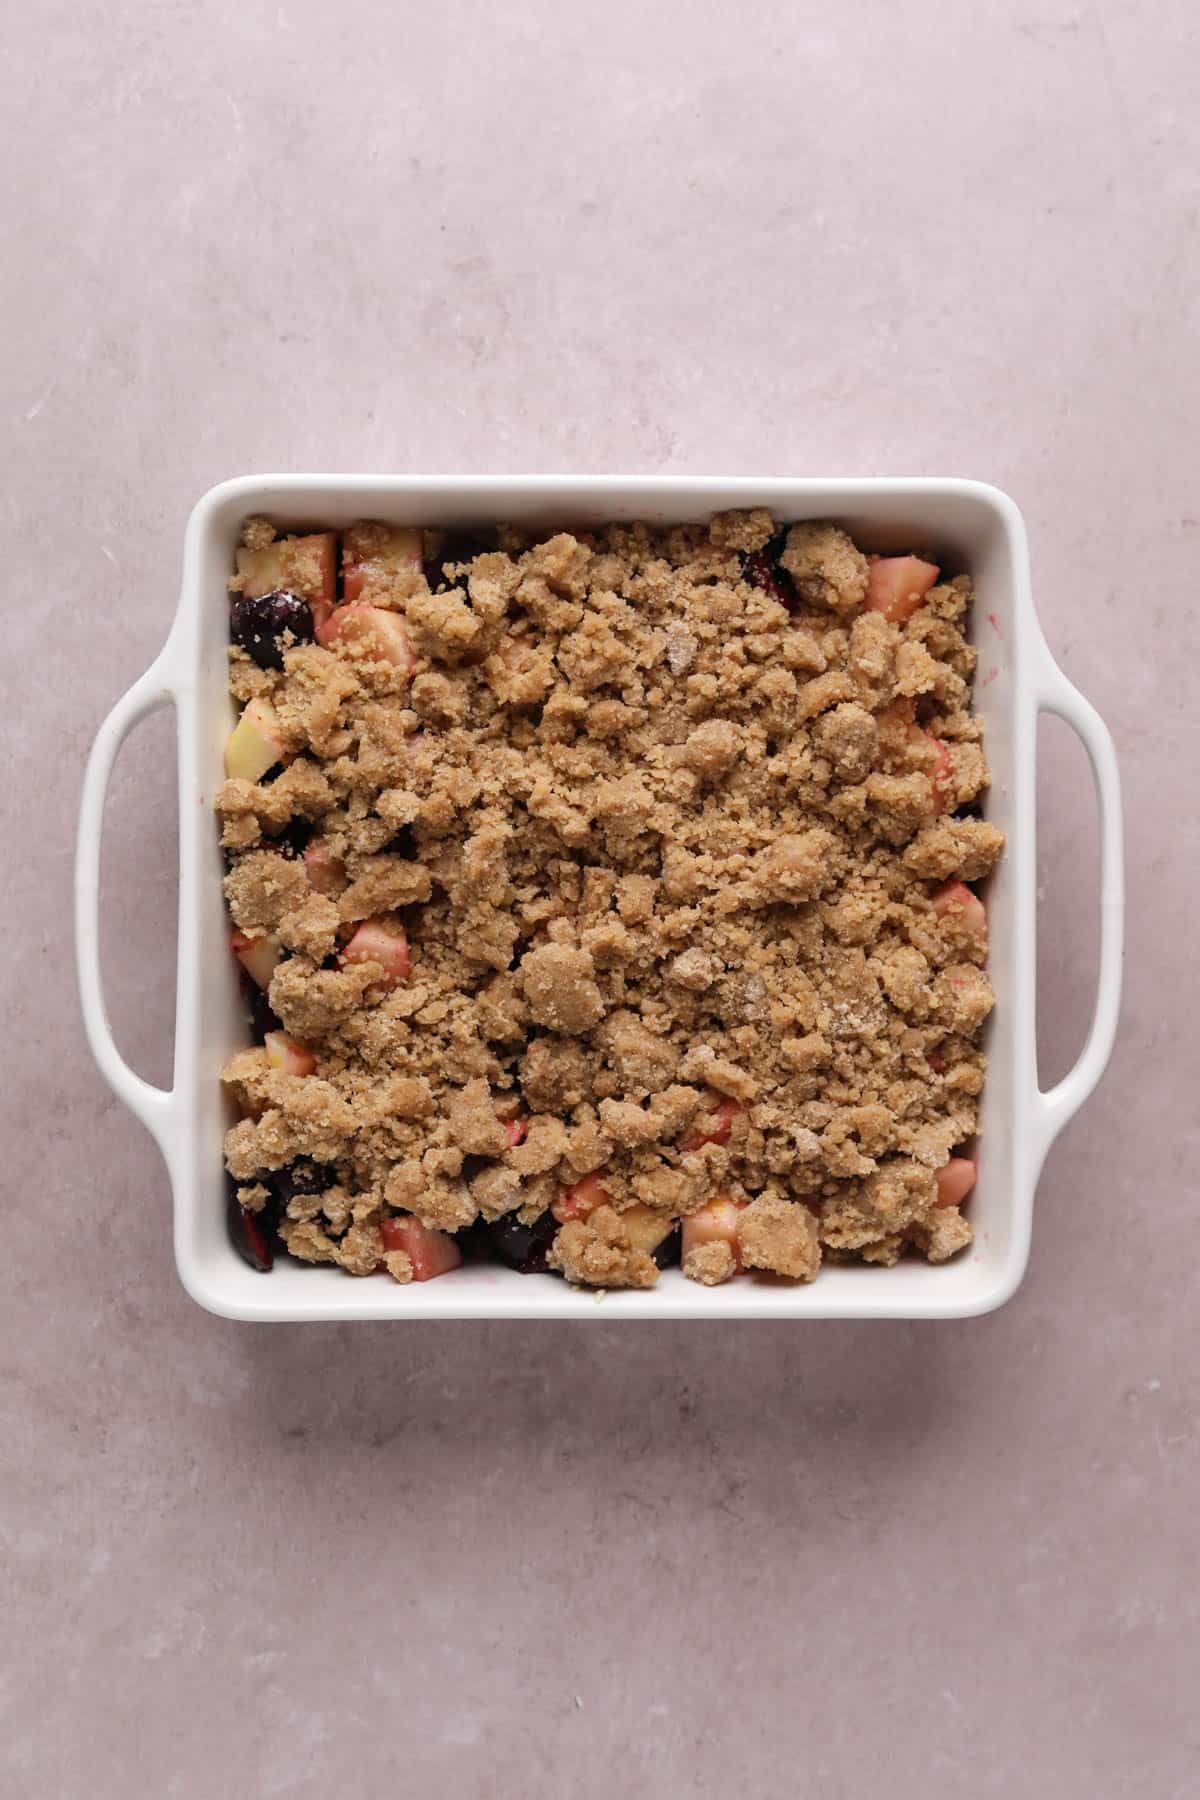 Unbaked cherry apple crumble in a white ceramic baking dish.